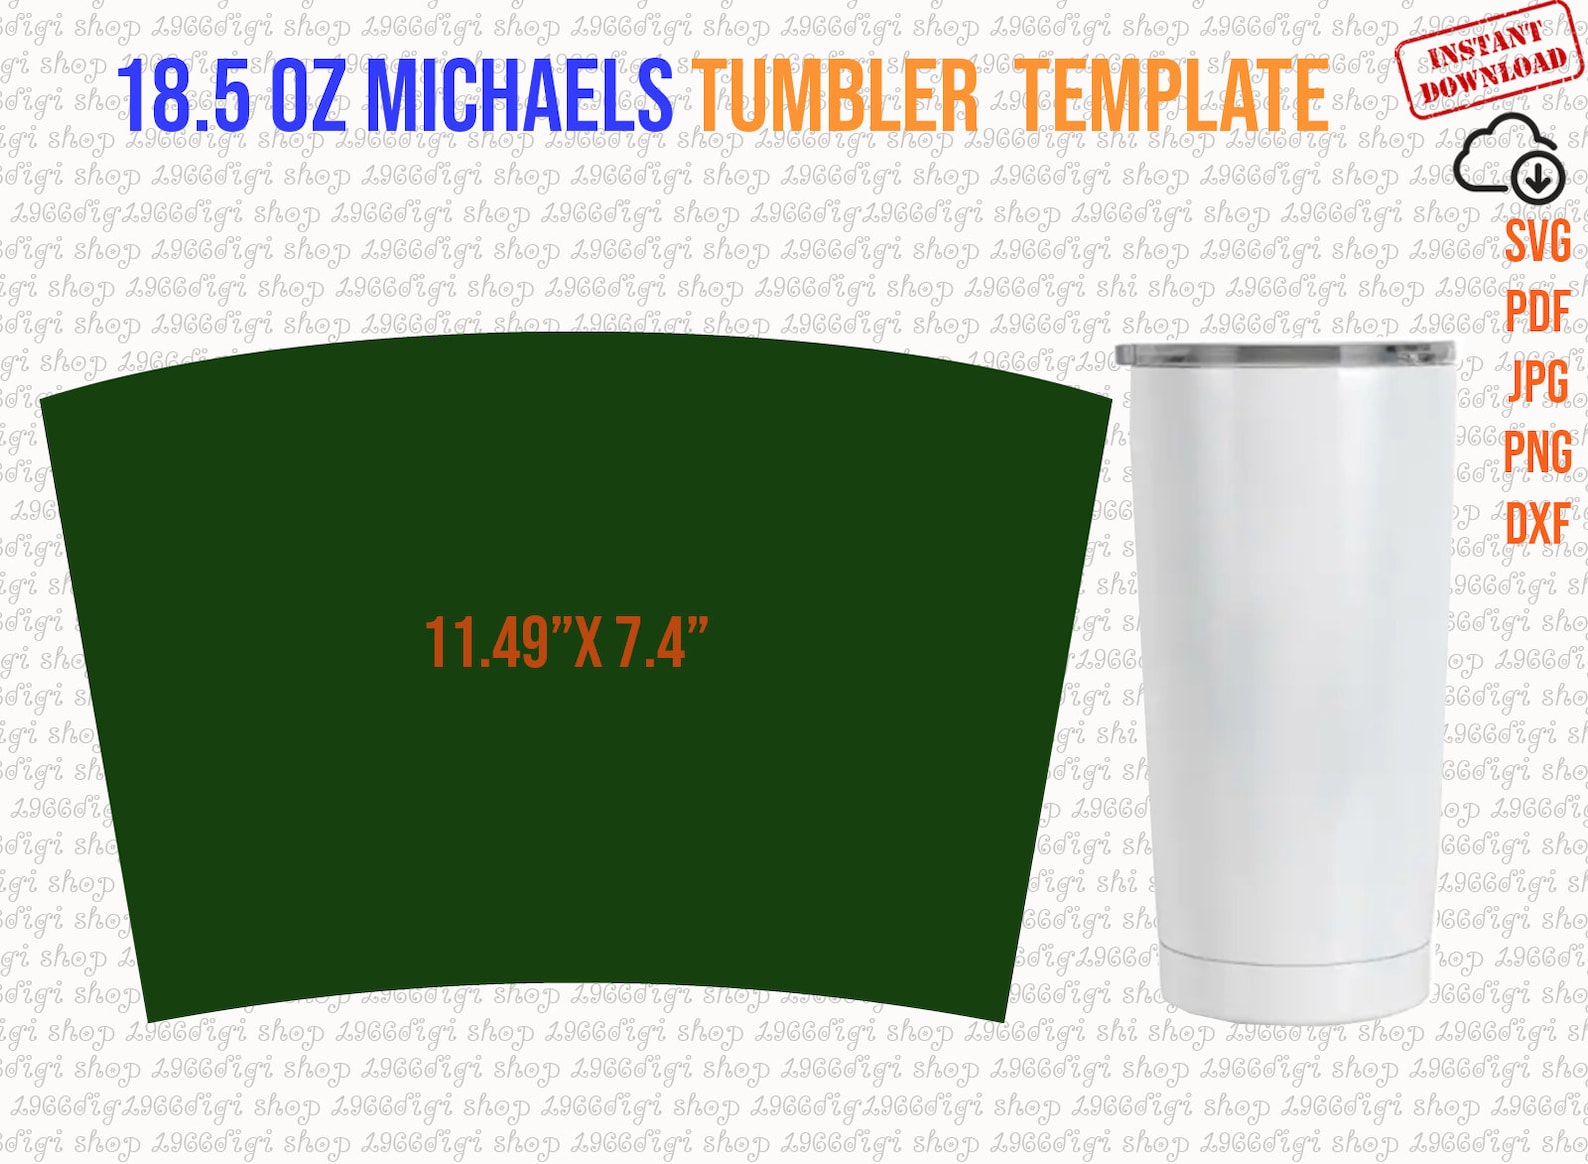 how-to-make-a-tumbler-wrap-template-in-design-space-best-design-idea